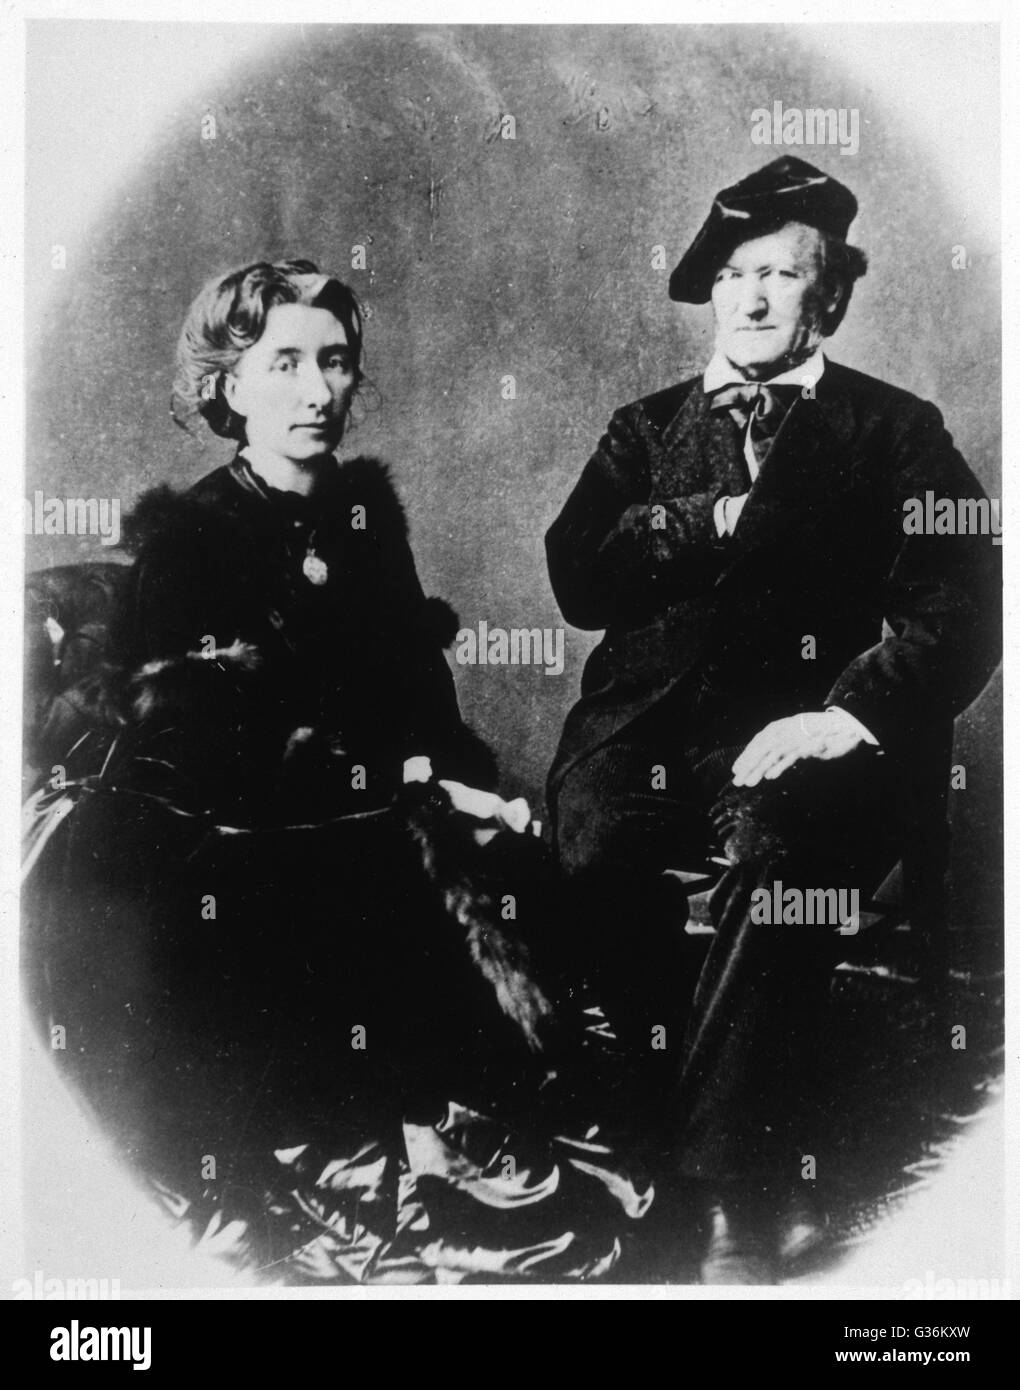 Richard Wagner (1813-1883) German musician, at age 70, with his wife Cosima Stock Photo